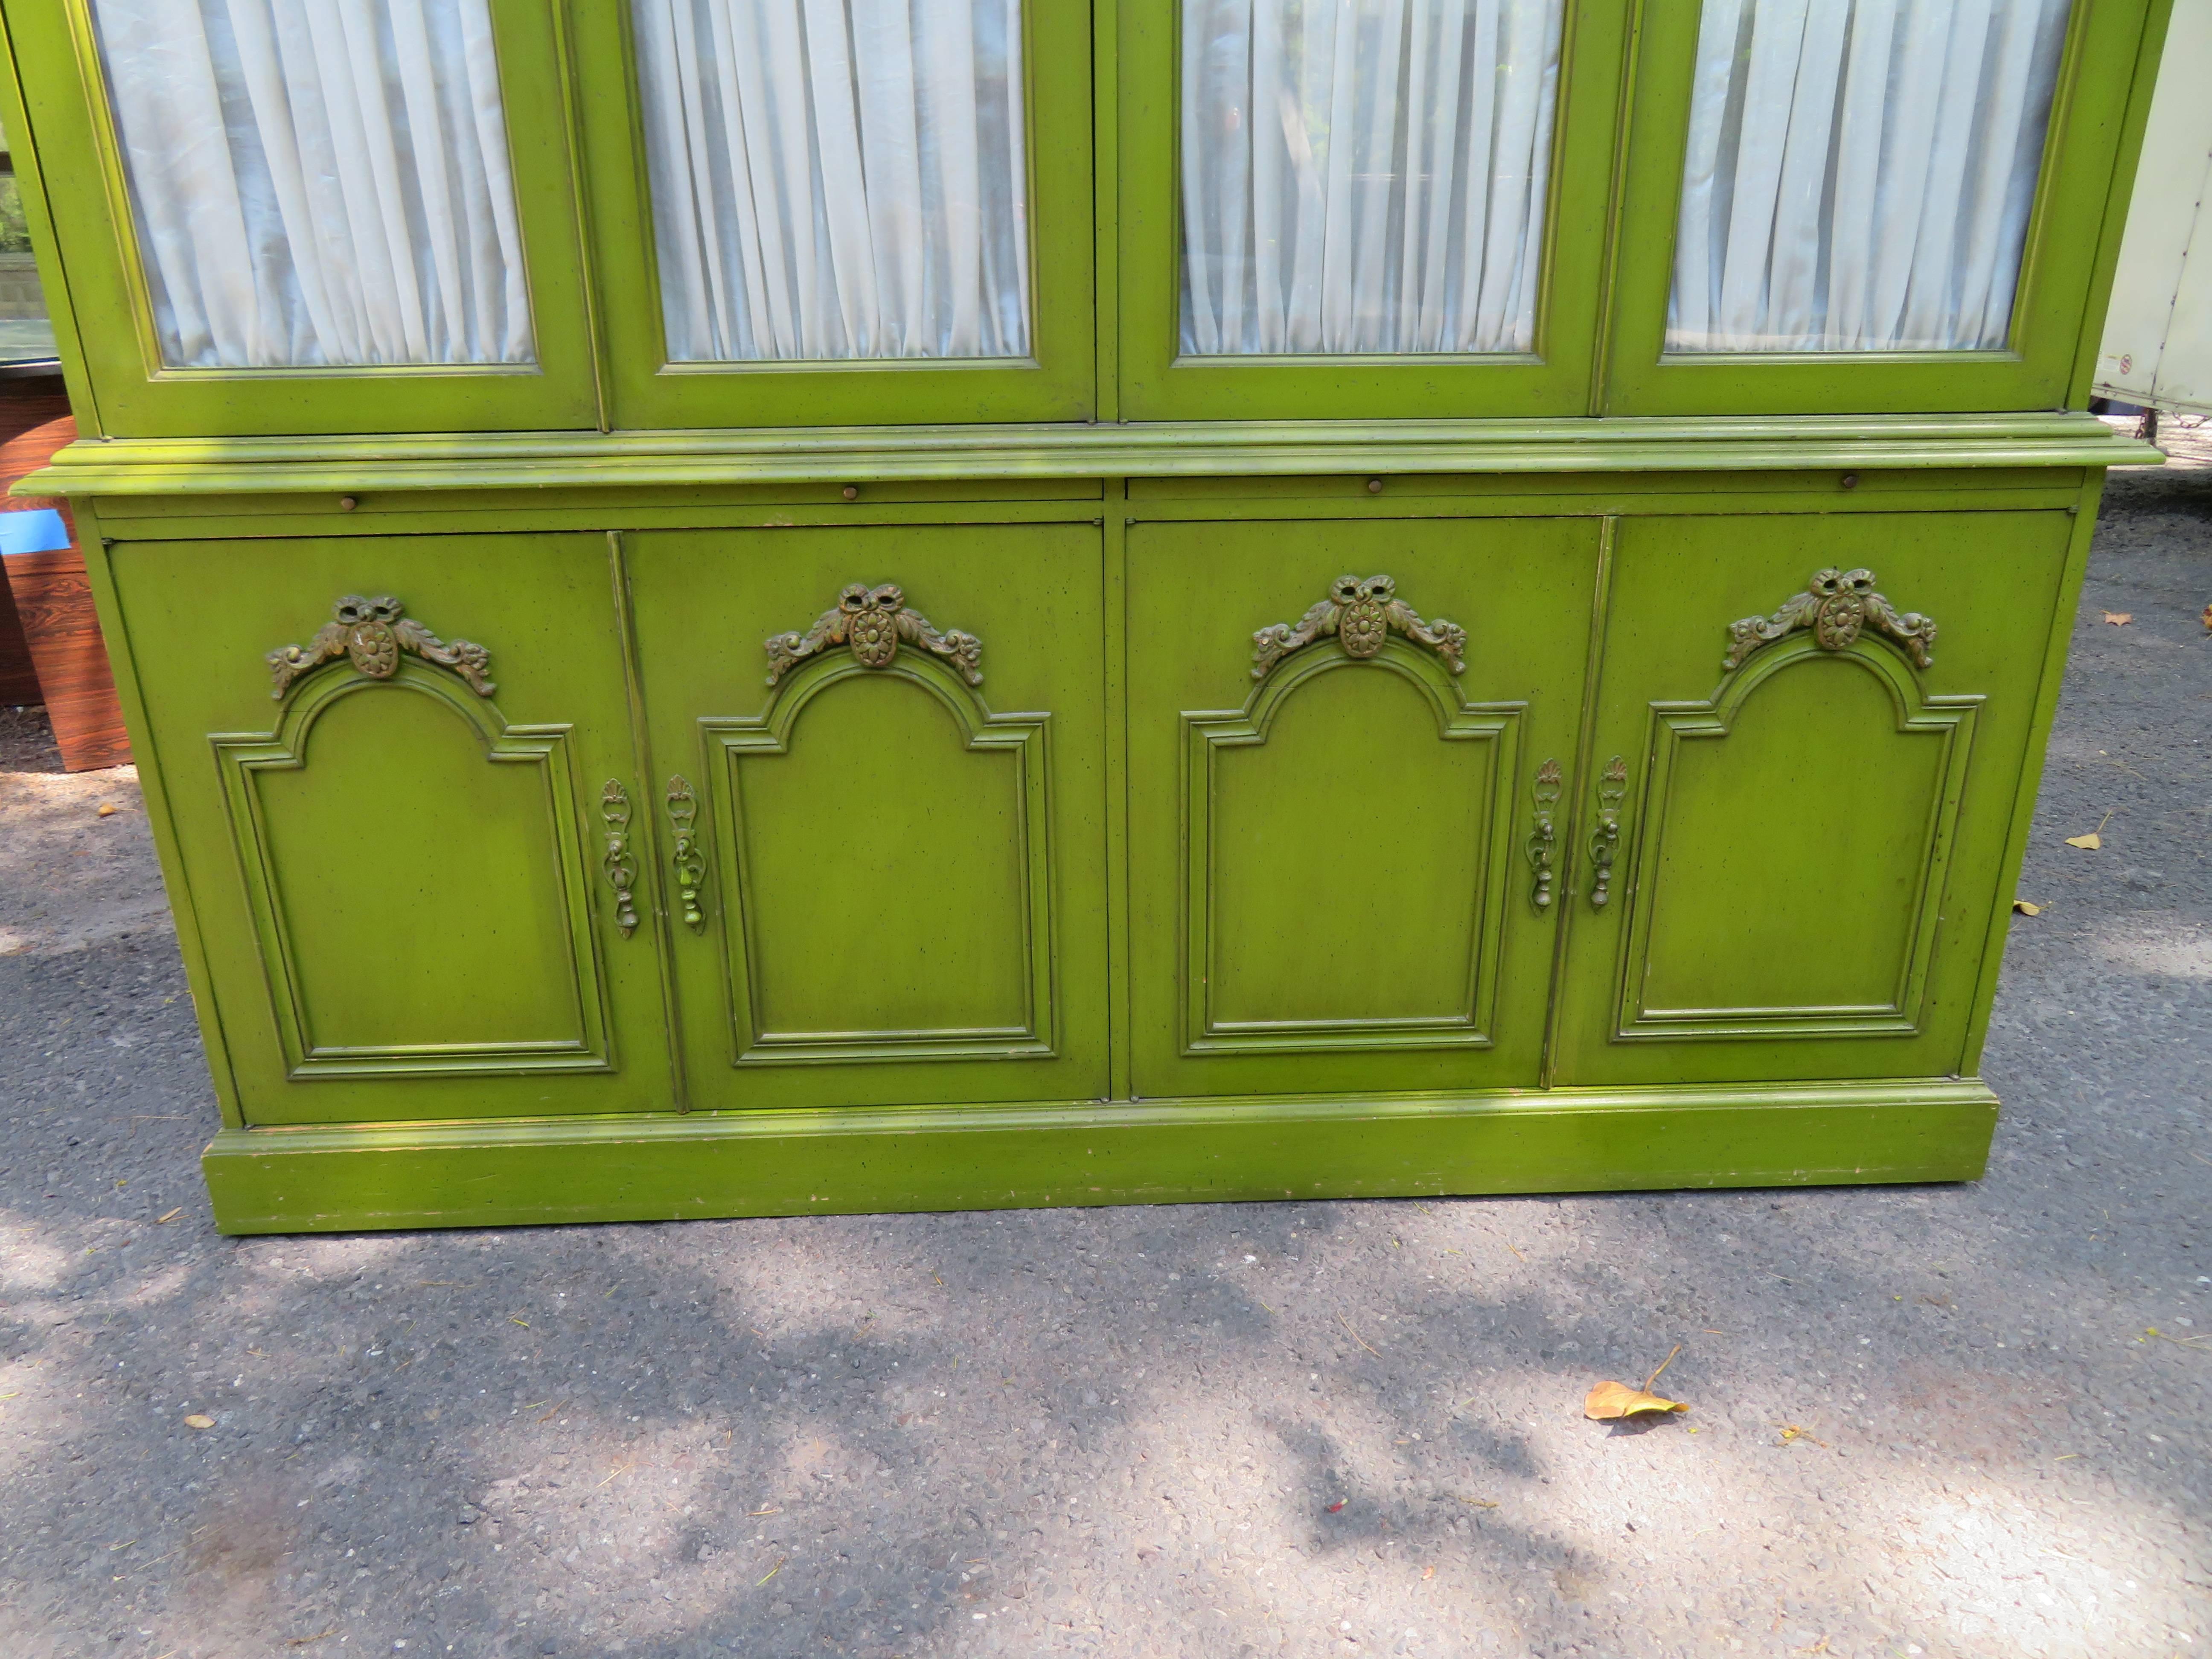 Magnificent Dorothy Draper style French Provincial hutch credenza. This piece is a show stopper with it's original lime green distressed finish and over the top quadruple arched top cabinet. Not sure if the curtains are original but they are well